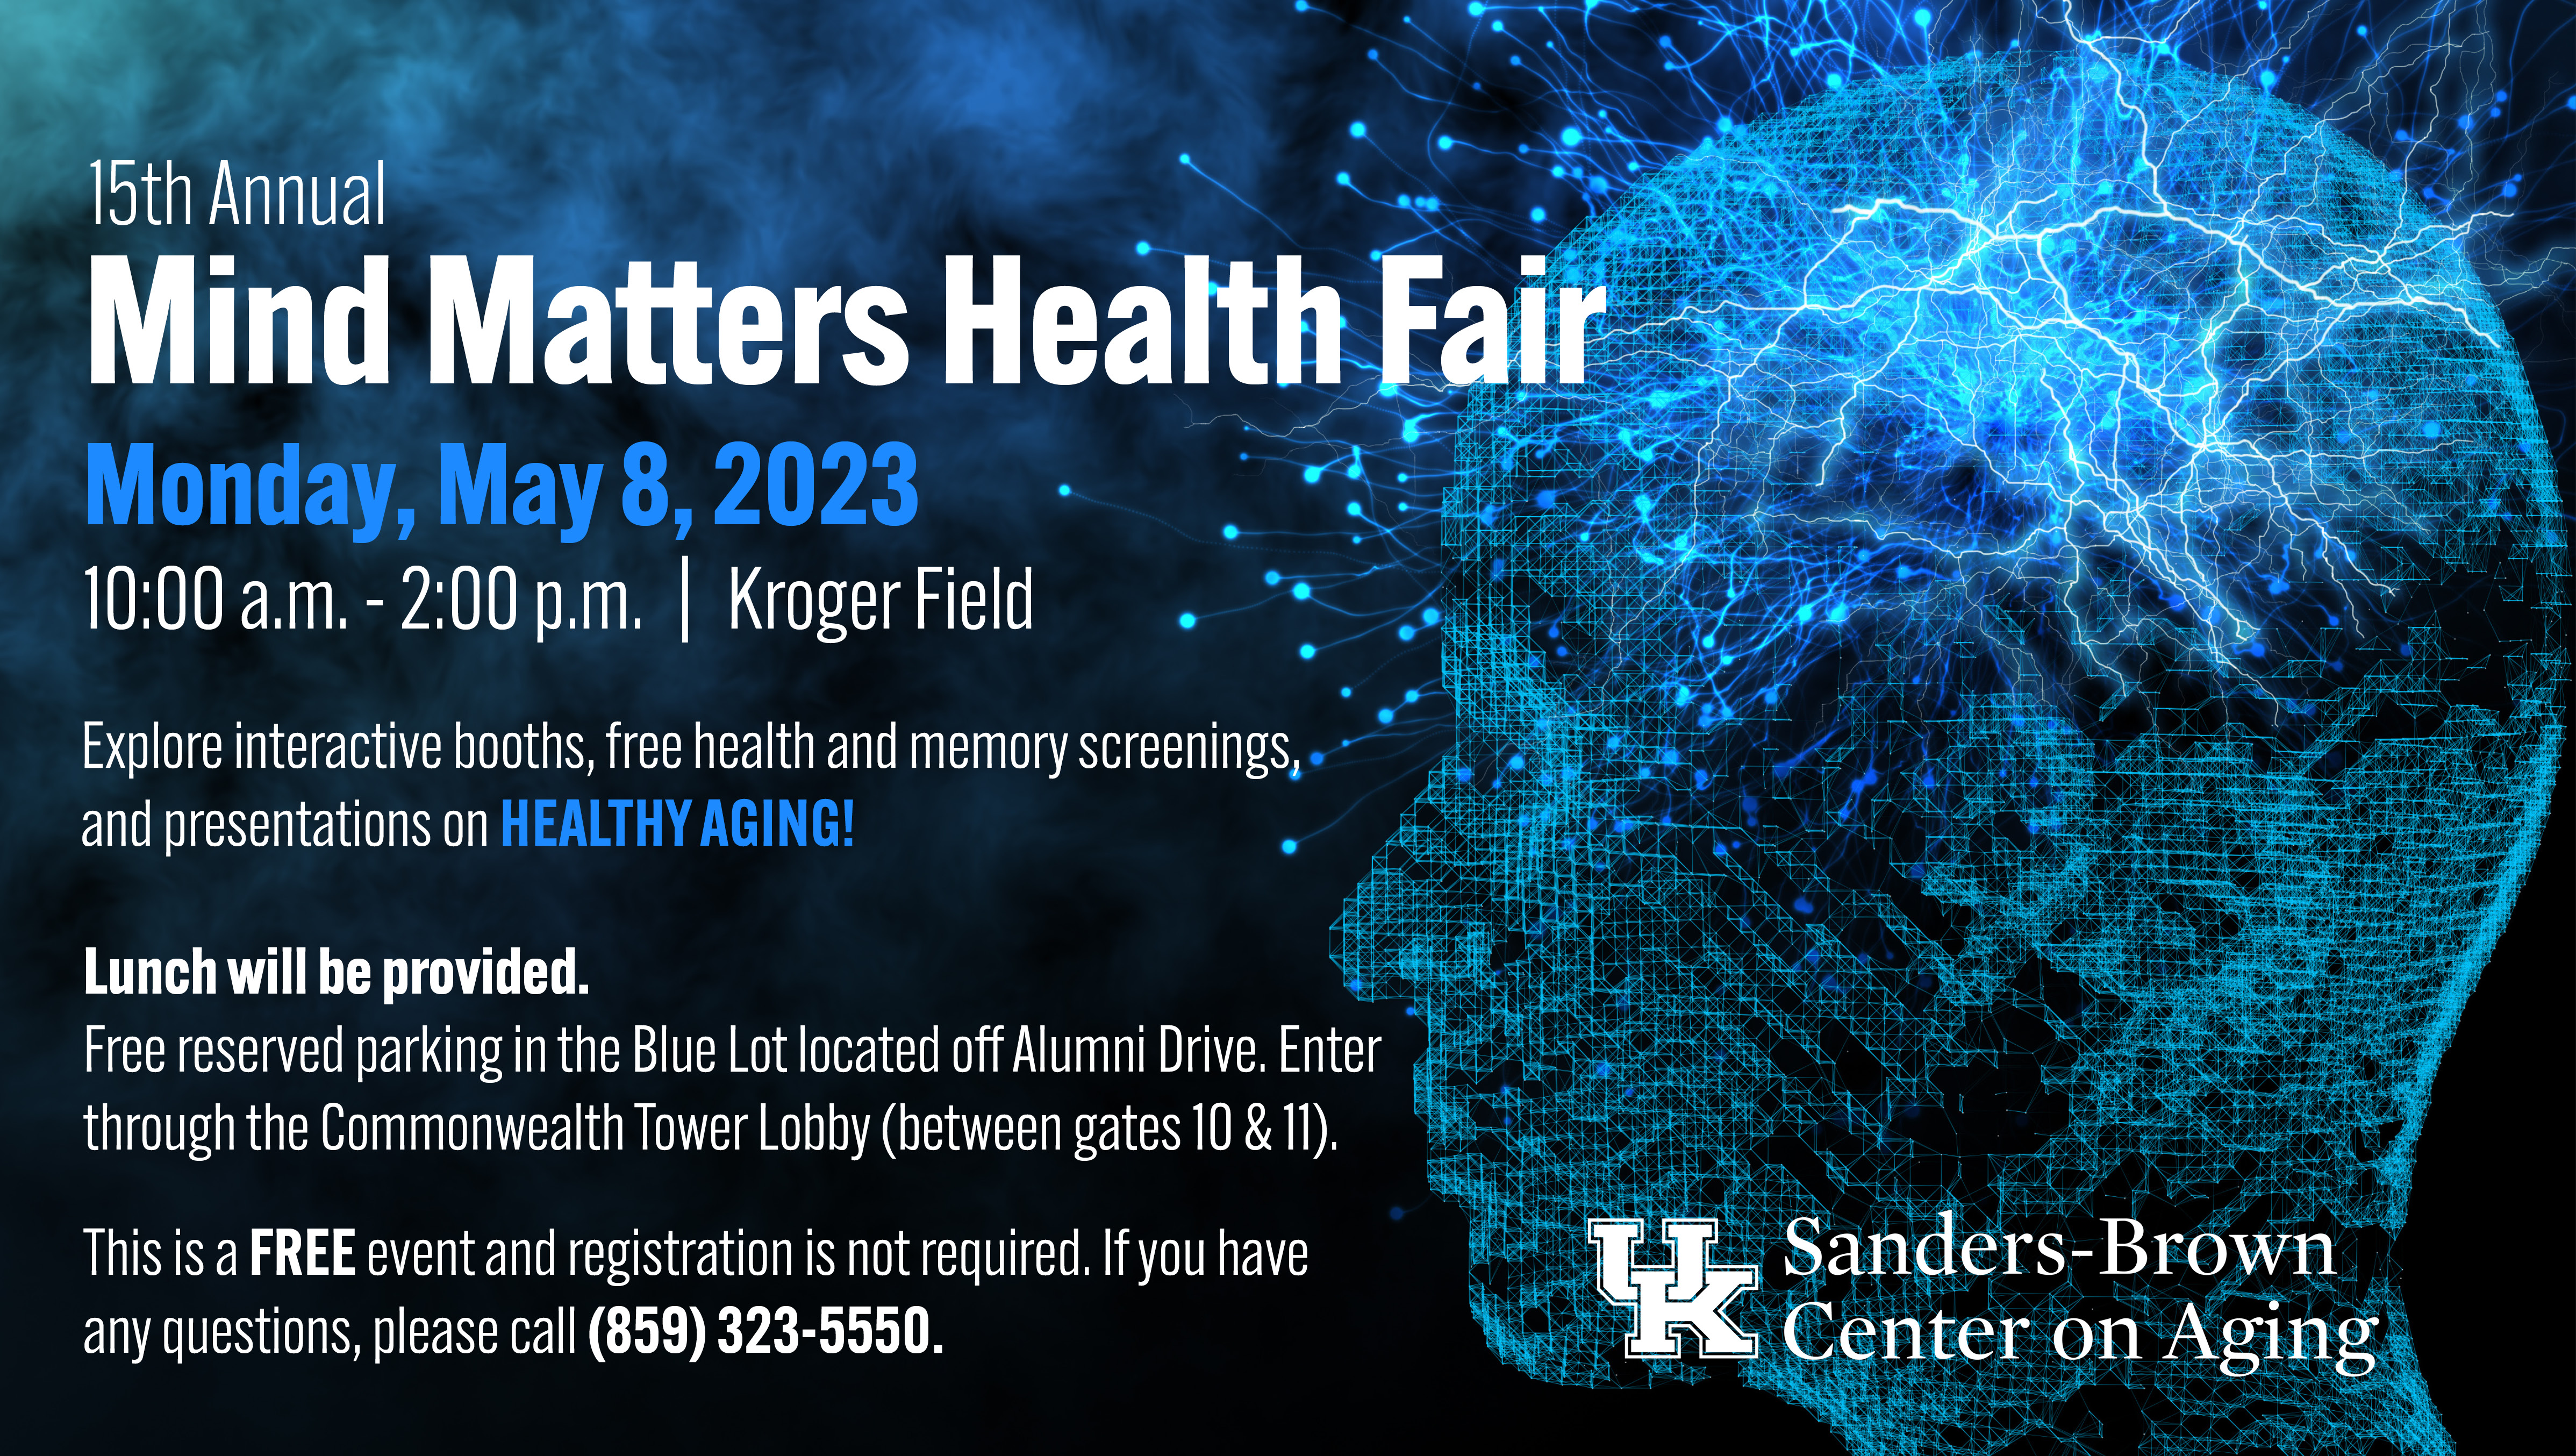 15th Annual Mind Matters Health Fair: Monday, May 8, 2023 from 10am – 2pm at Kroger Field. Explore interactive booths, free health and memory screenings, and presentations on healthy aging! Lunch will be provided. Free reserved parking in the Blue Lot located off Alumni Drive. Enter through the Commonwealth Tower Lobby (between gates 10 and 11). This is a FREE event and registration is not required. If you have any questions, please call (859) 323-5550.